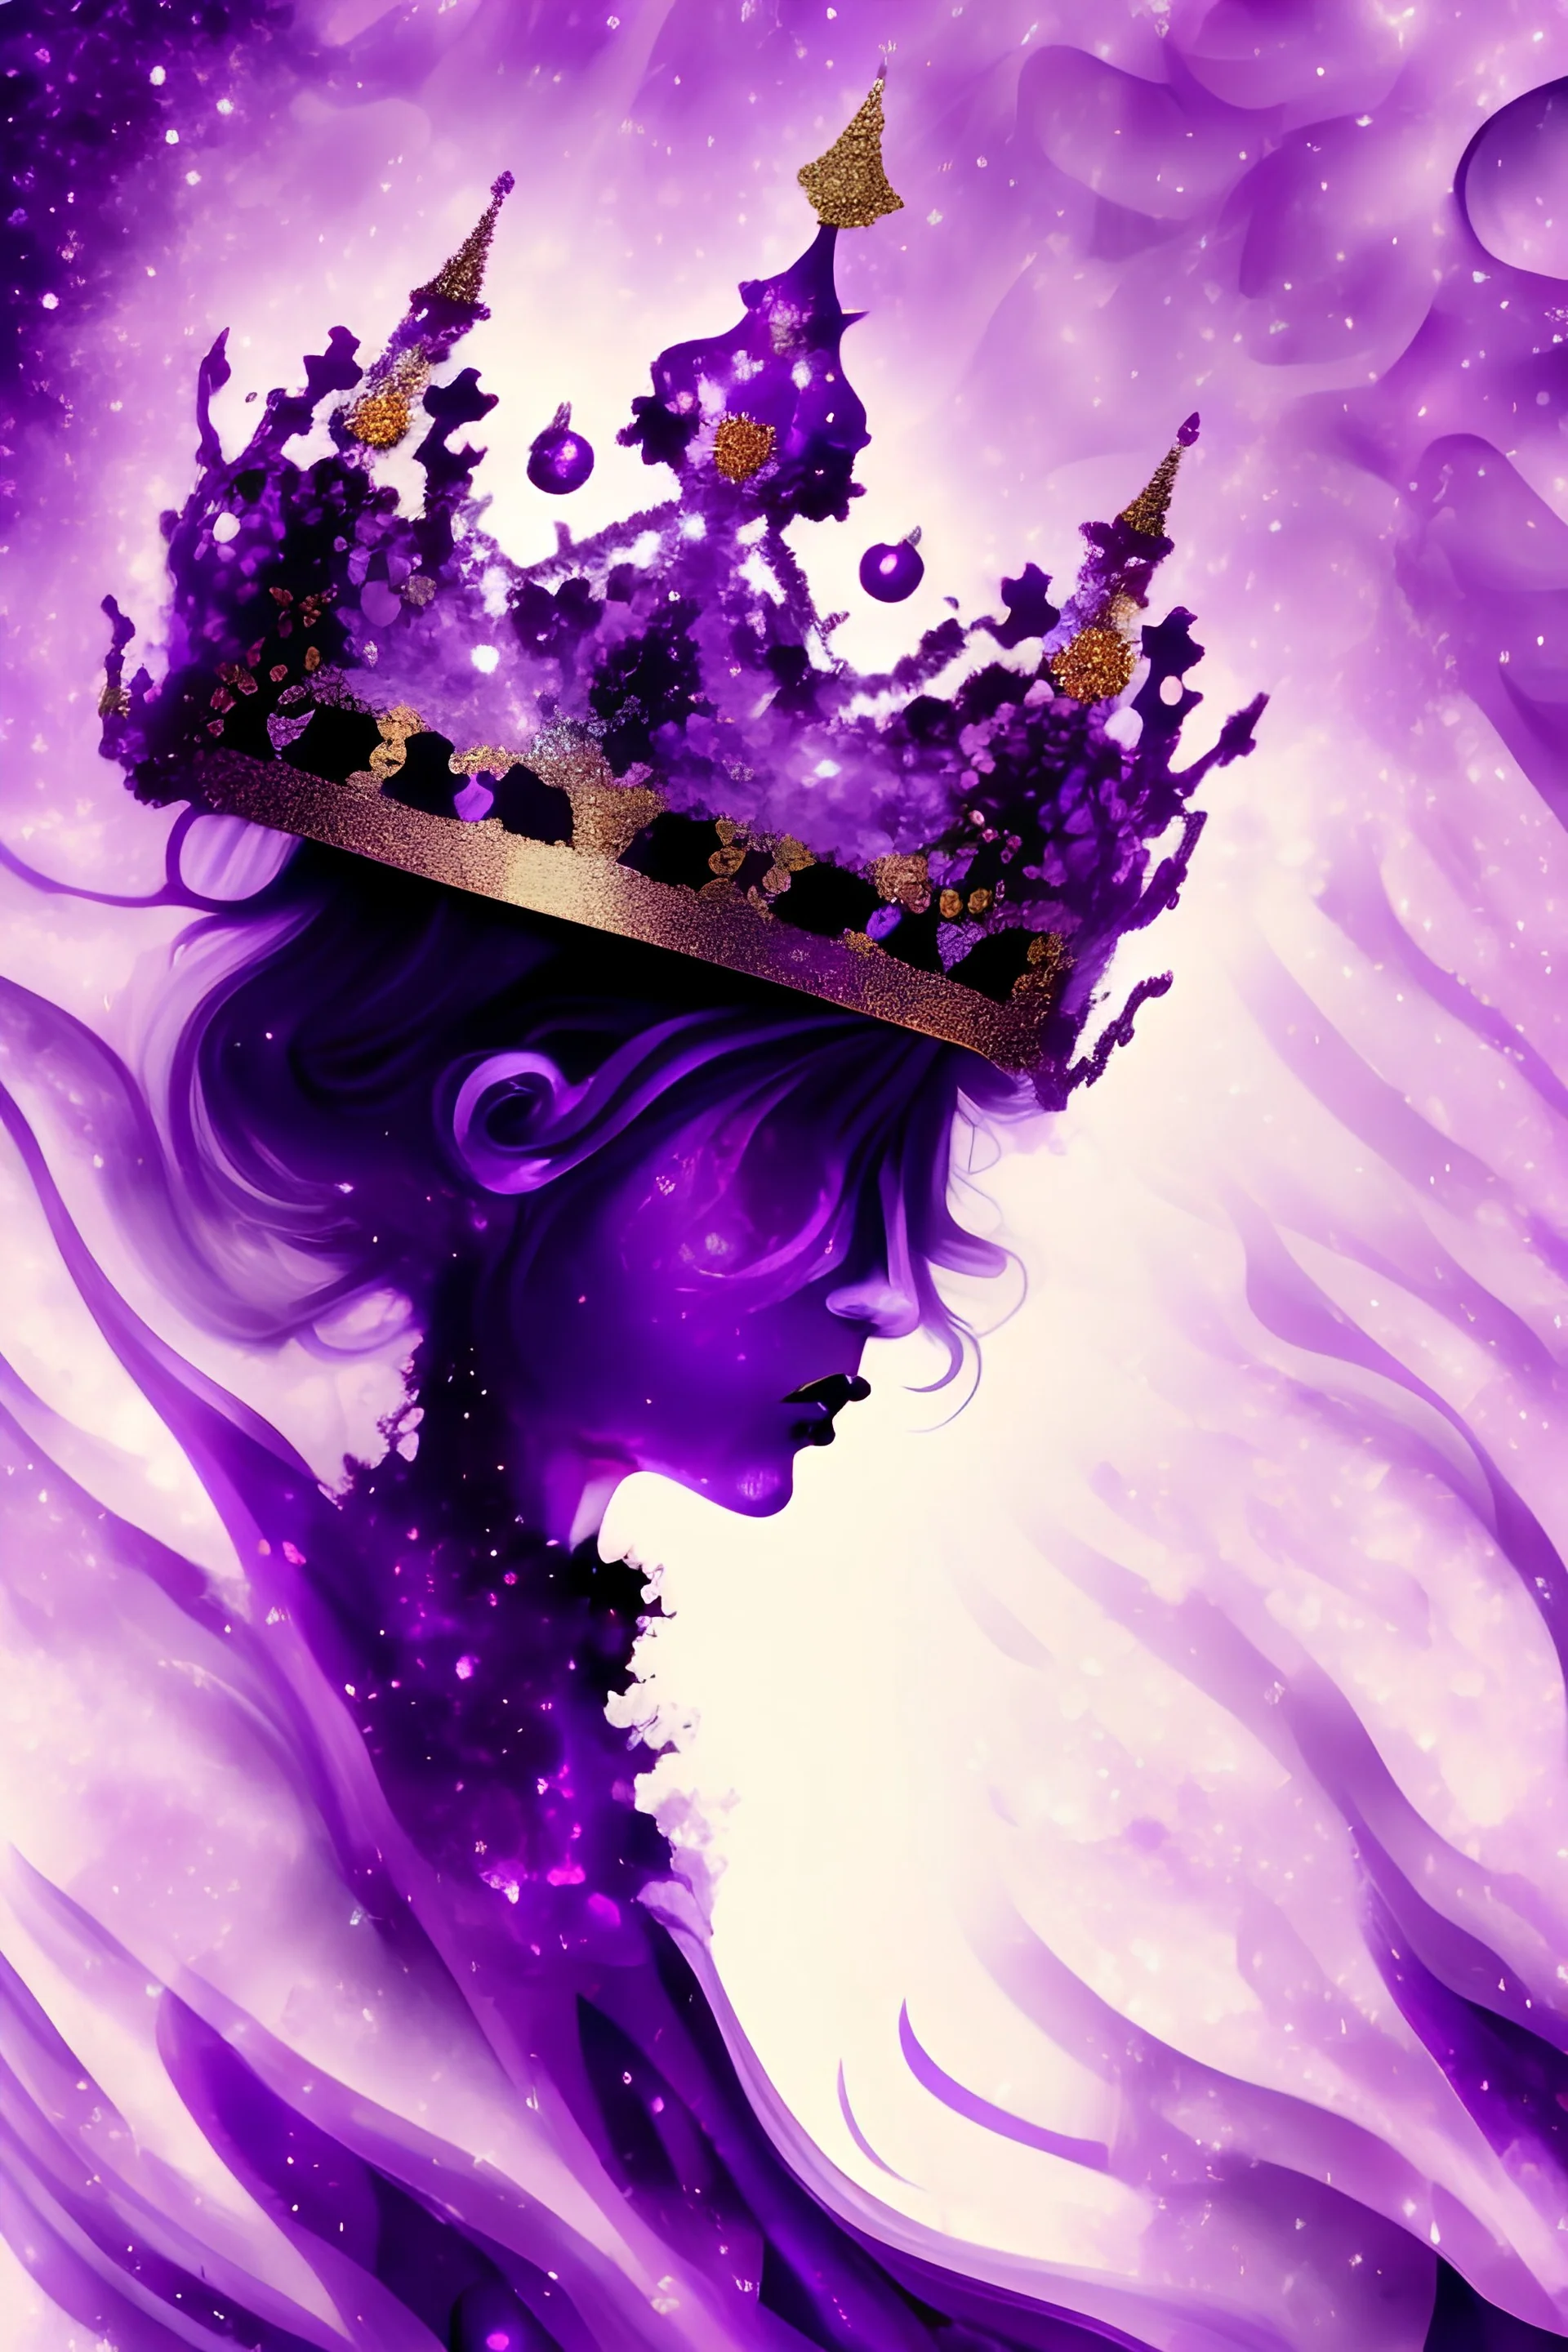 a small figure with a crown in a beautiful purple sparkly background, abstract and fantasy art